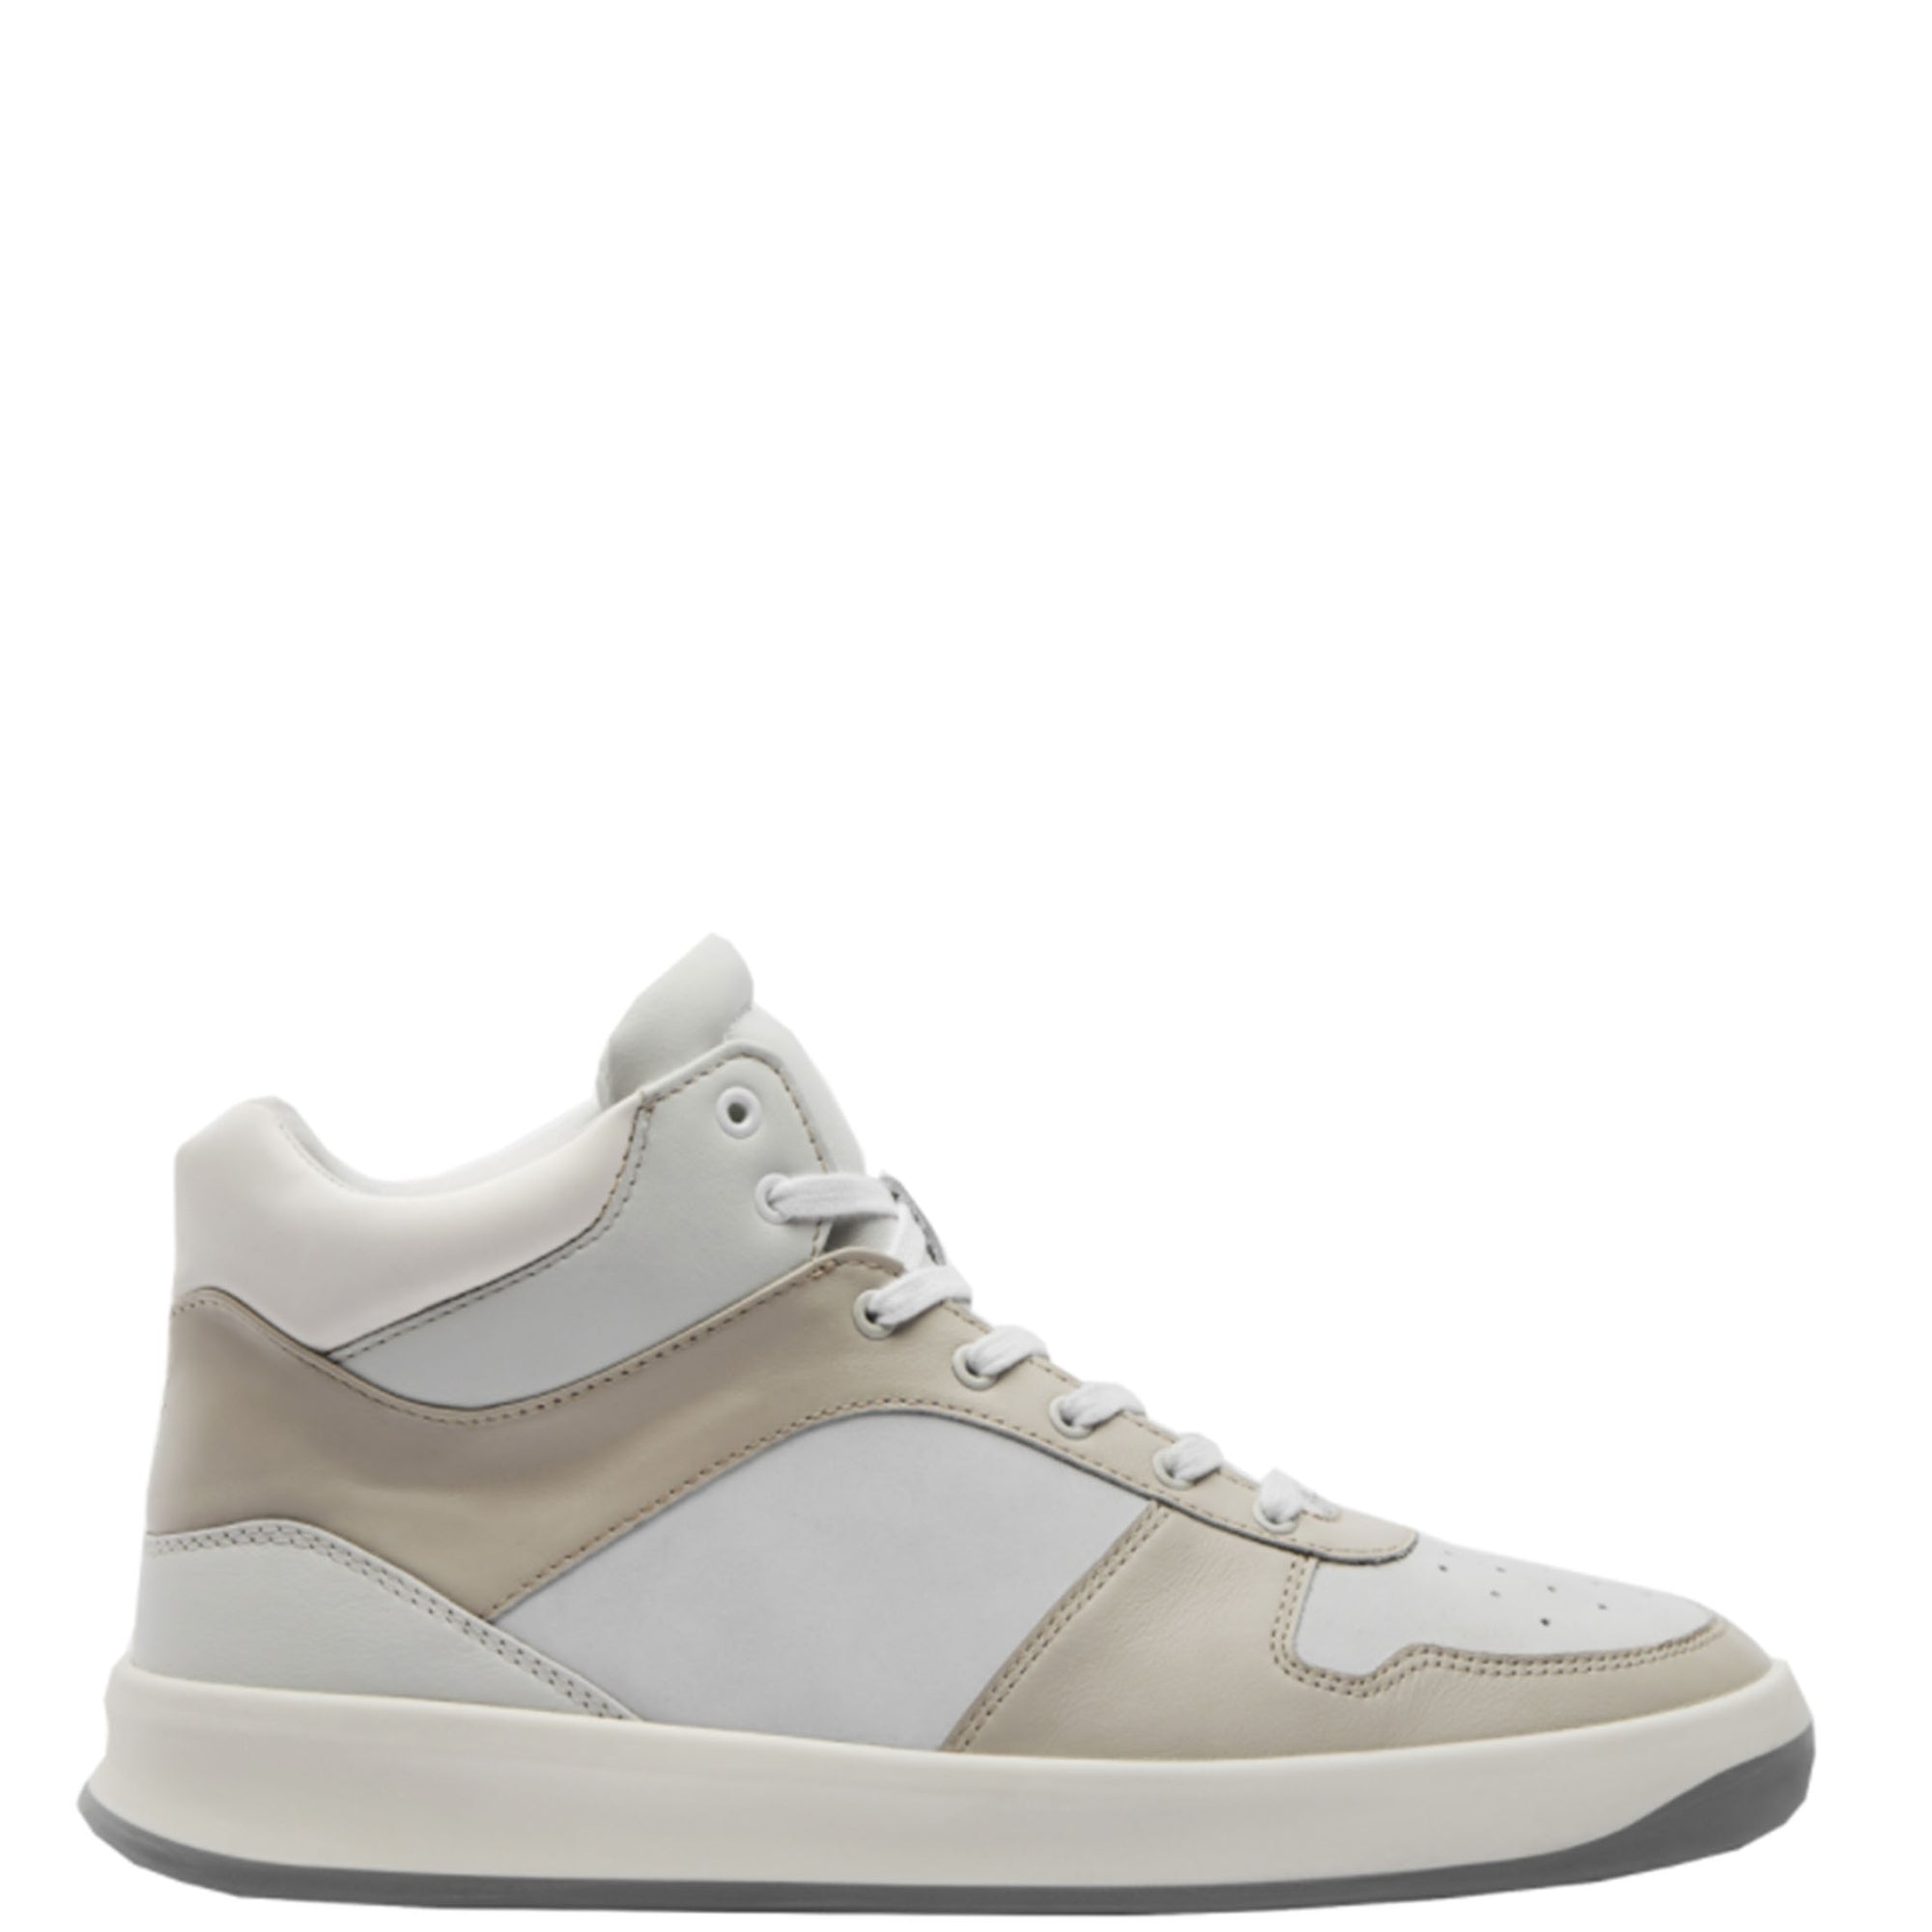 VOR.SHOES Premium High-top Sneaker aus Leder, Leder Sneaker in Off-white und creme, Beige Lederturnschuhe, Turnschuhe aus Leder, Sneaker mit Memory-Schaum Einlegesohle, Sneaker, Dicke Sohle, Lederschuhe, Leather sneaker, Made in Europe, Fair trade, Eco-friendly, Handmade, Handcrafted - Shop now - the wearness online-shop - SUSTAINABLE & ETHICAL LUXURY FASHION